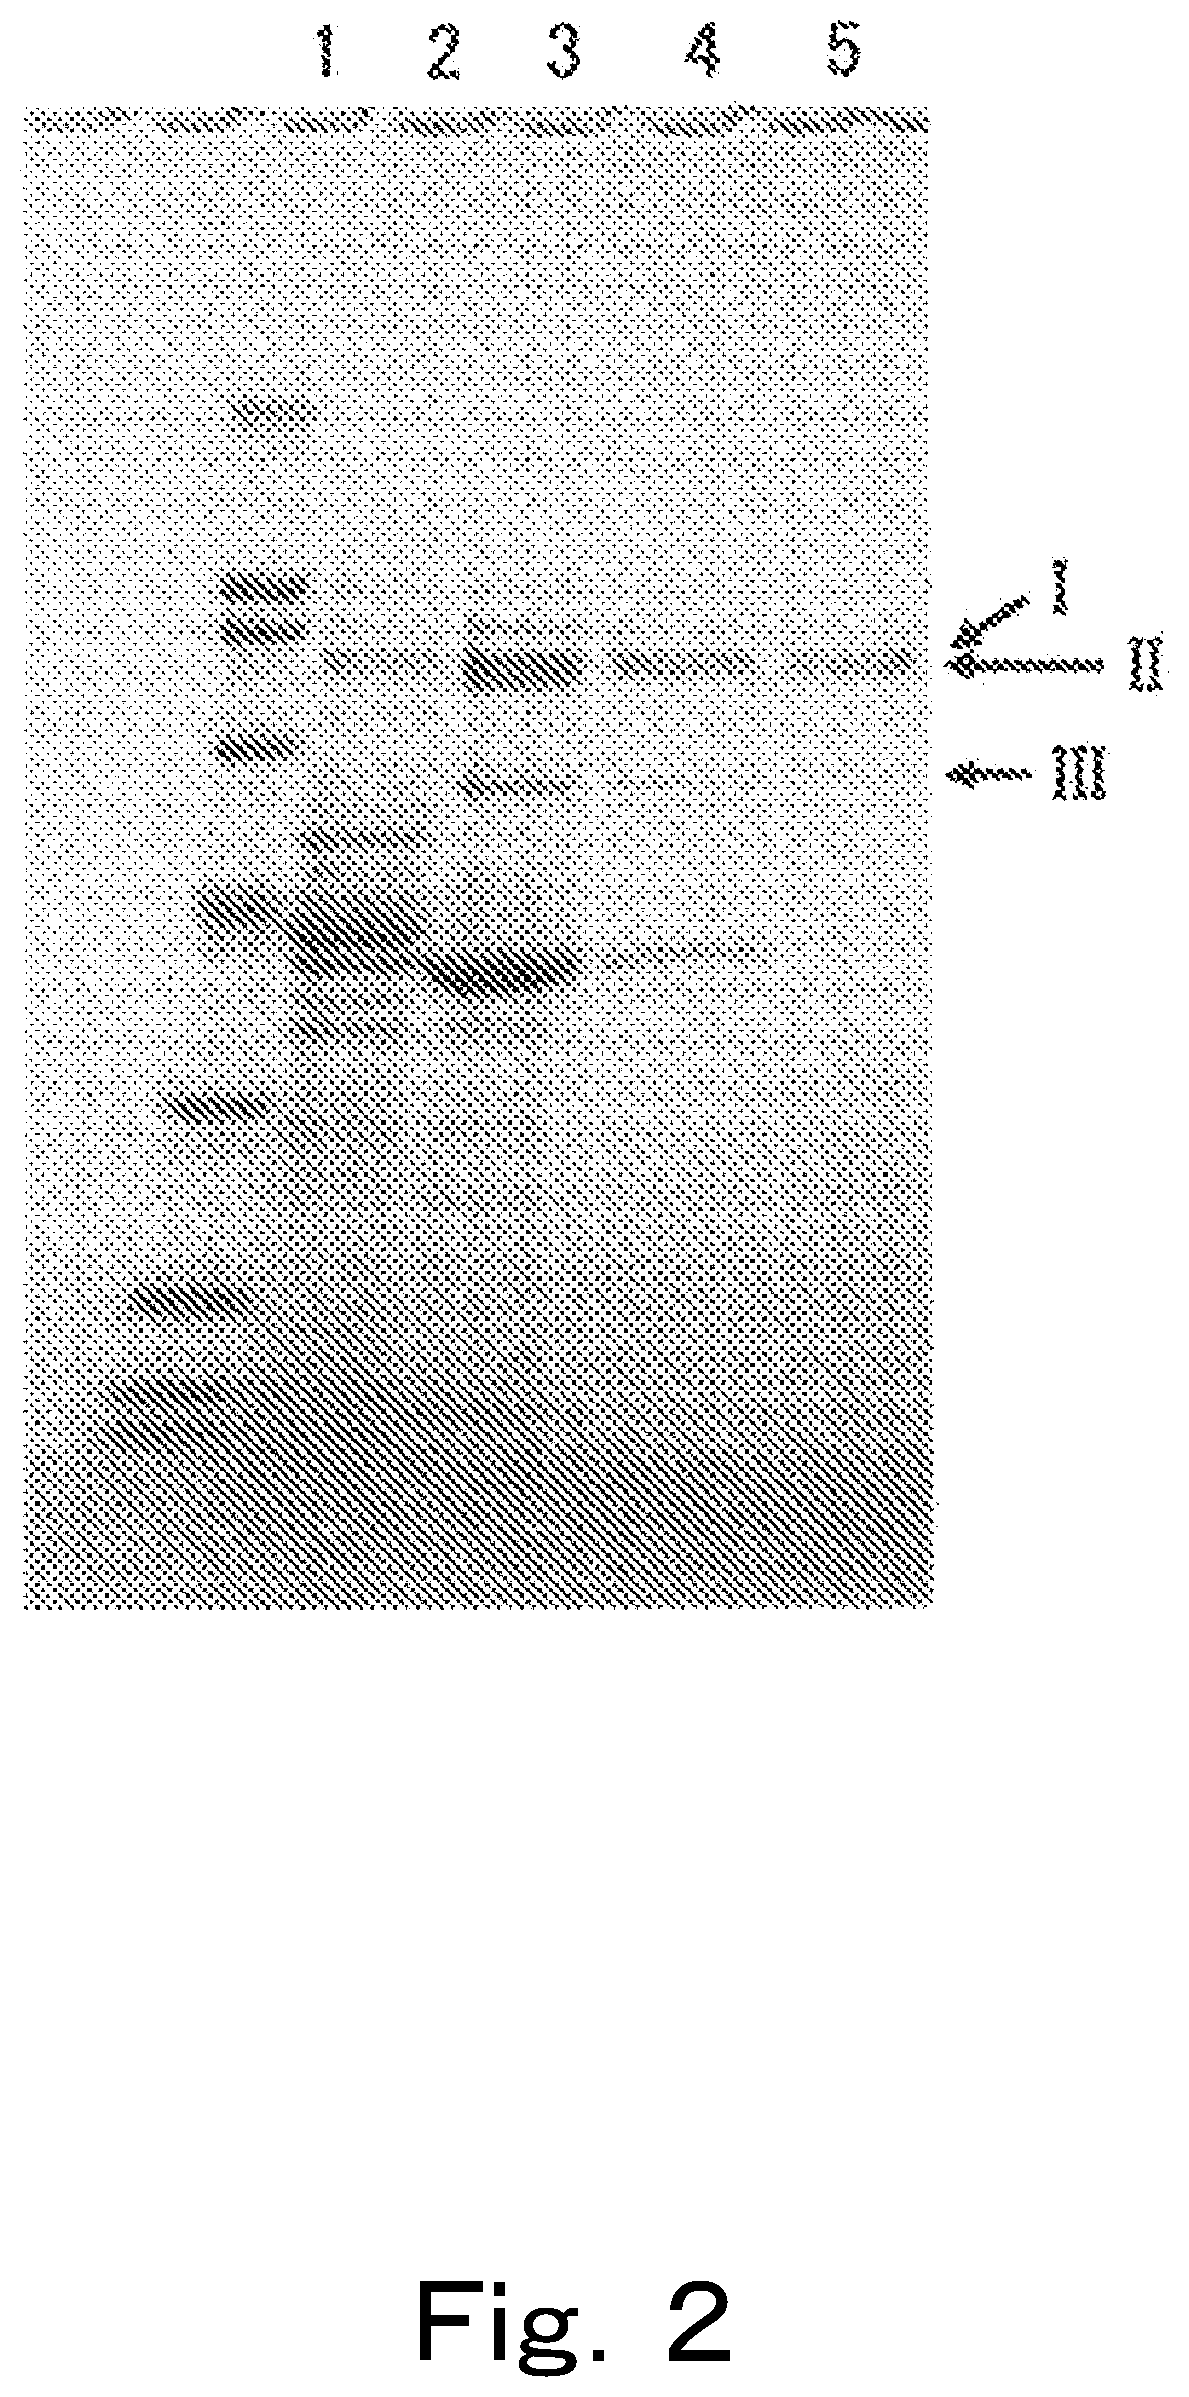 Enzyme capable of dehydroxylating hydroxyl group in urolithin compound